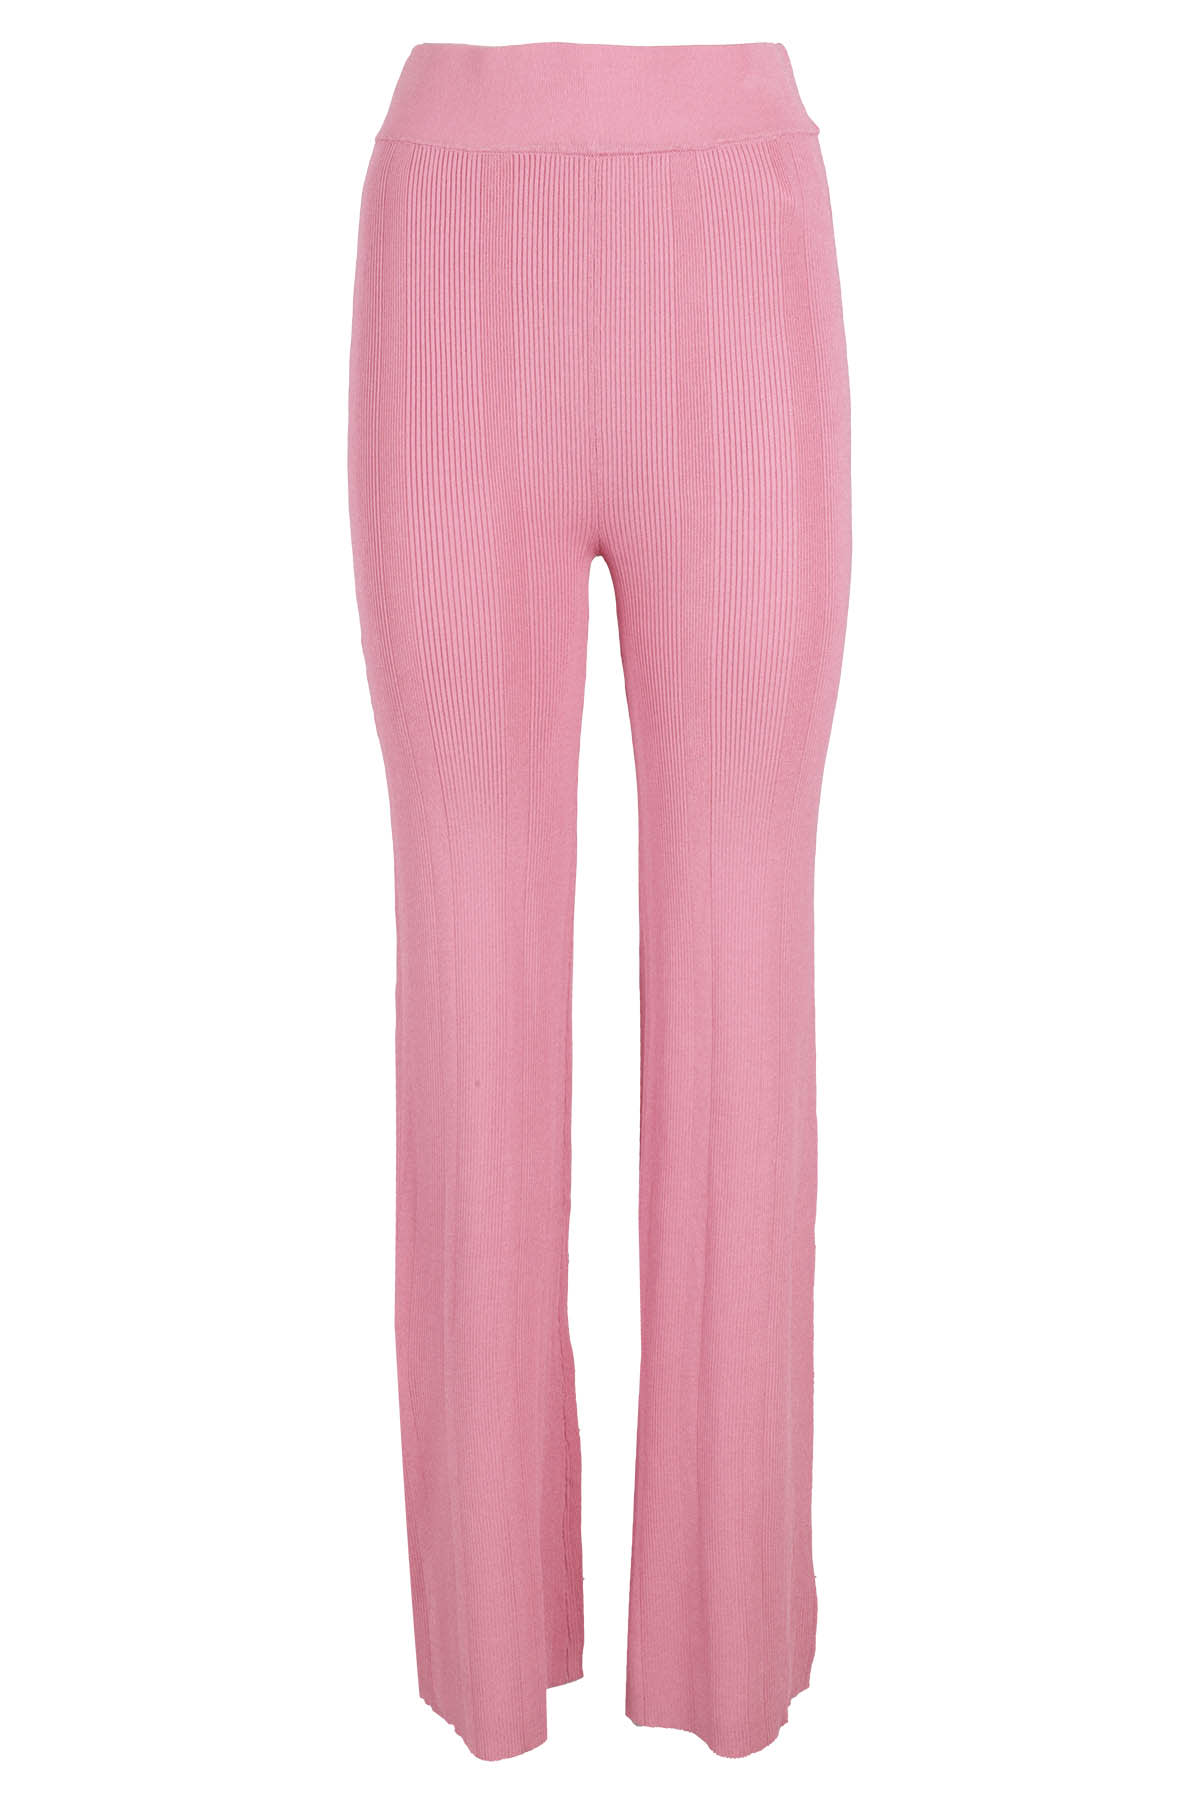 Remain Birger Christensen Ribbed Knit Straight Pant In Cashmere Rose